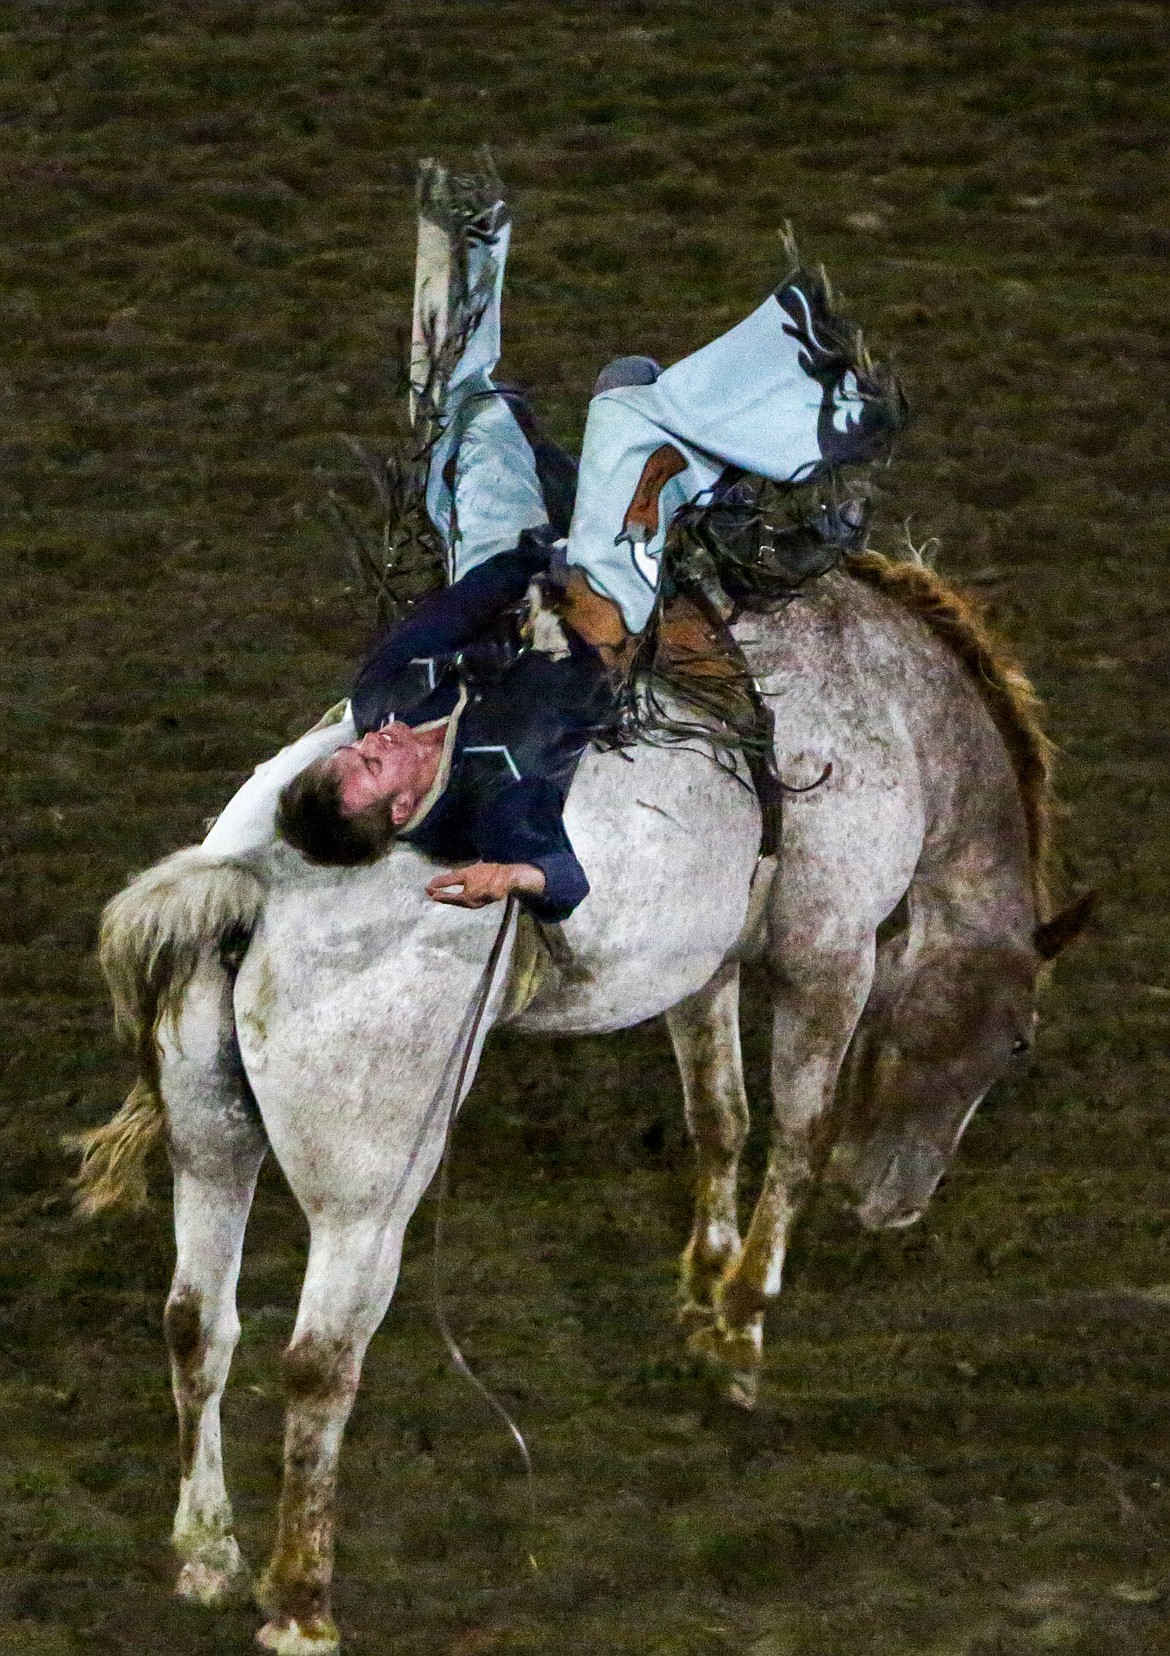 Saddle bronc rider Colton Clemens’ body goes one way while his horse goes another on Saturday night at the Othello PRCA Rodeo.